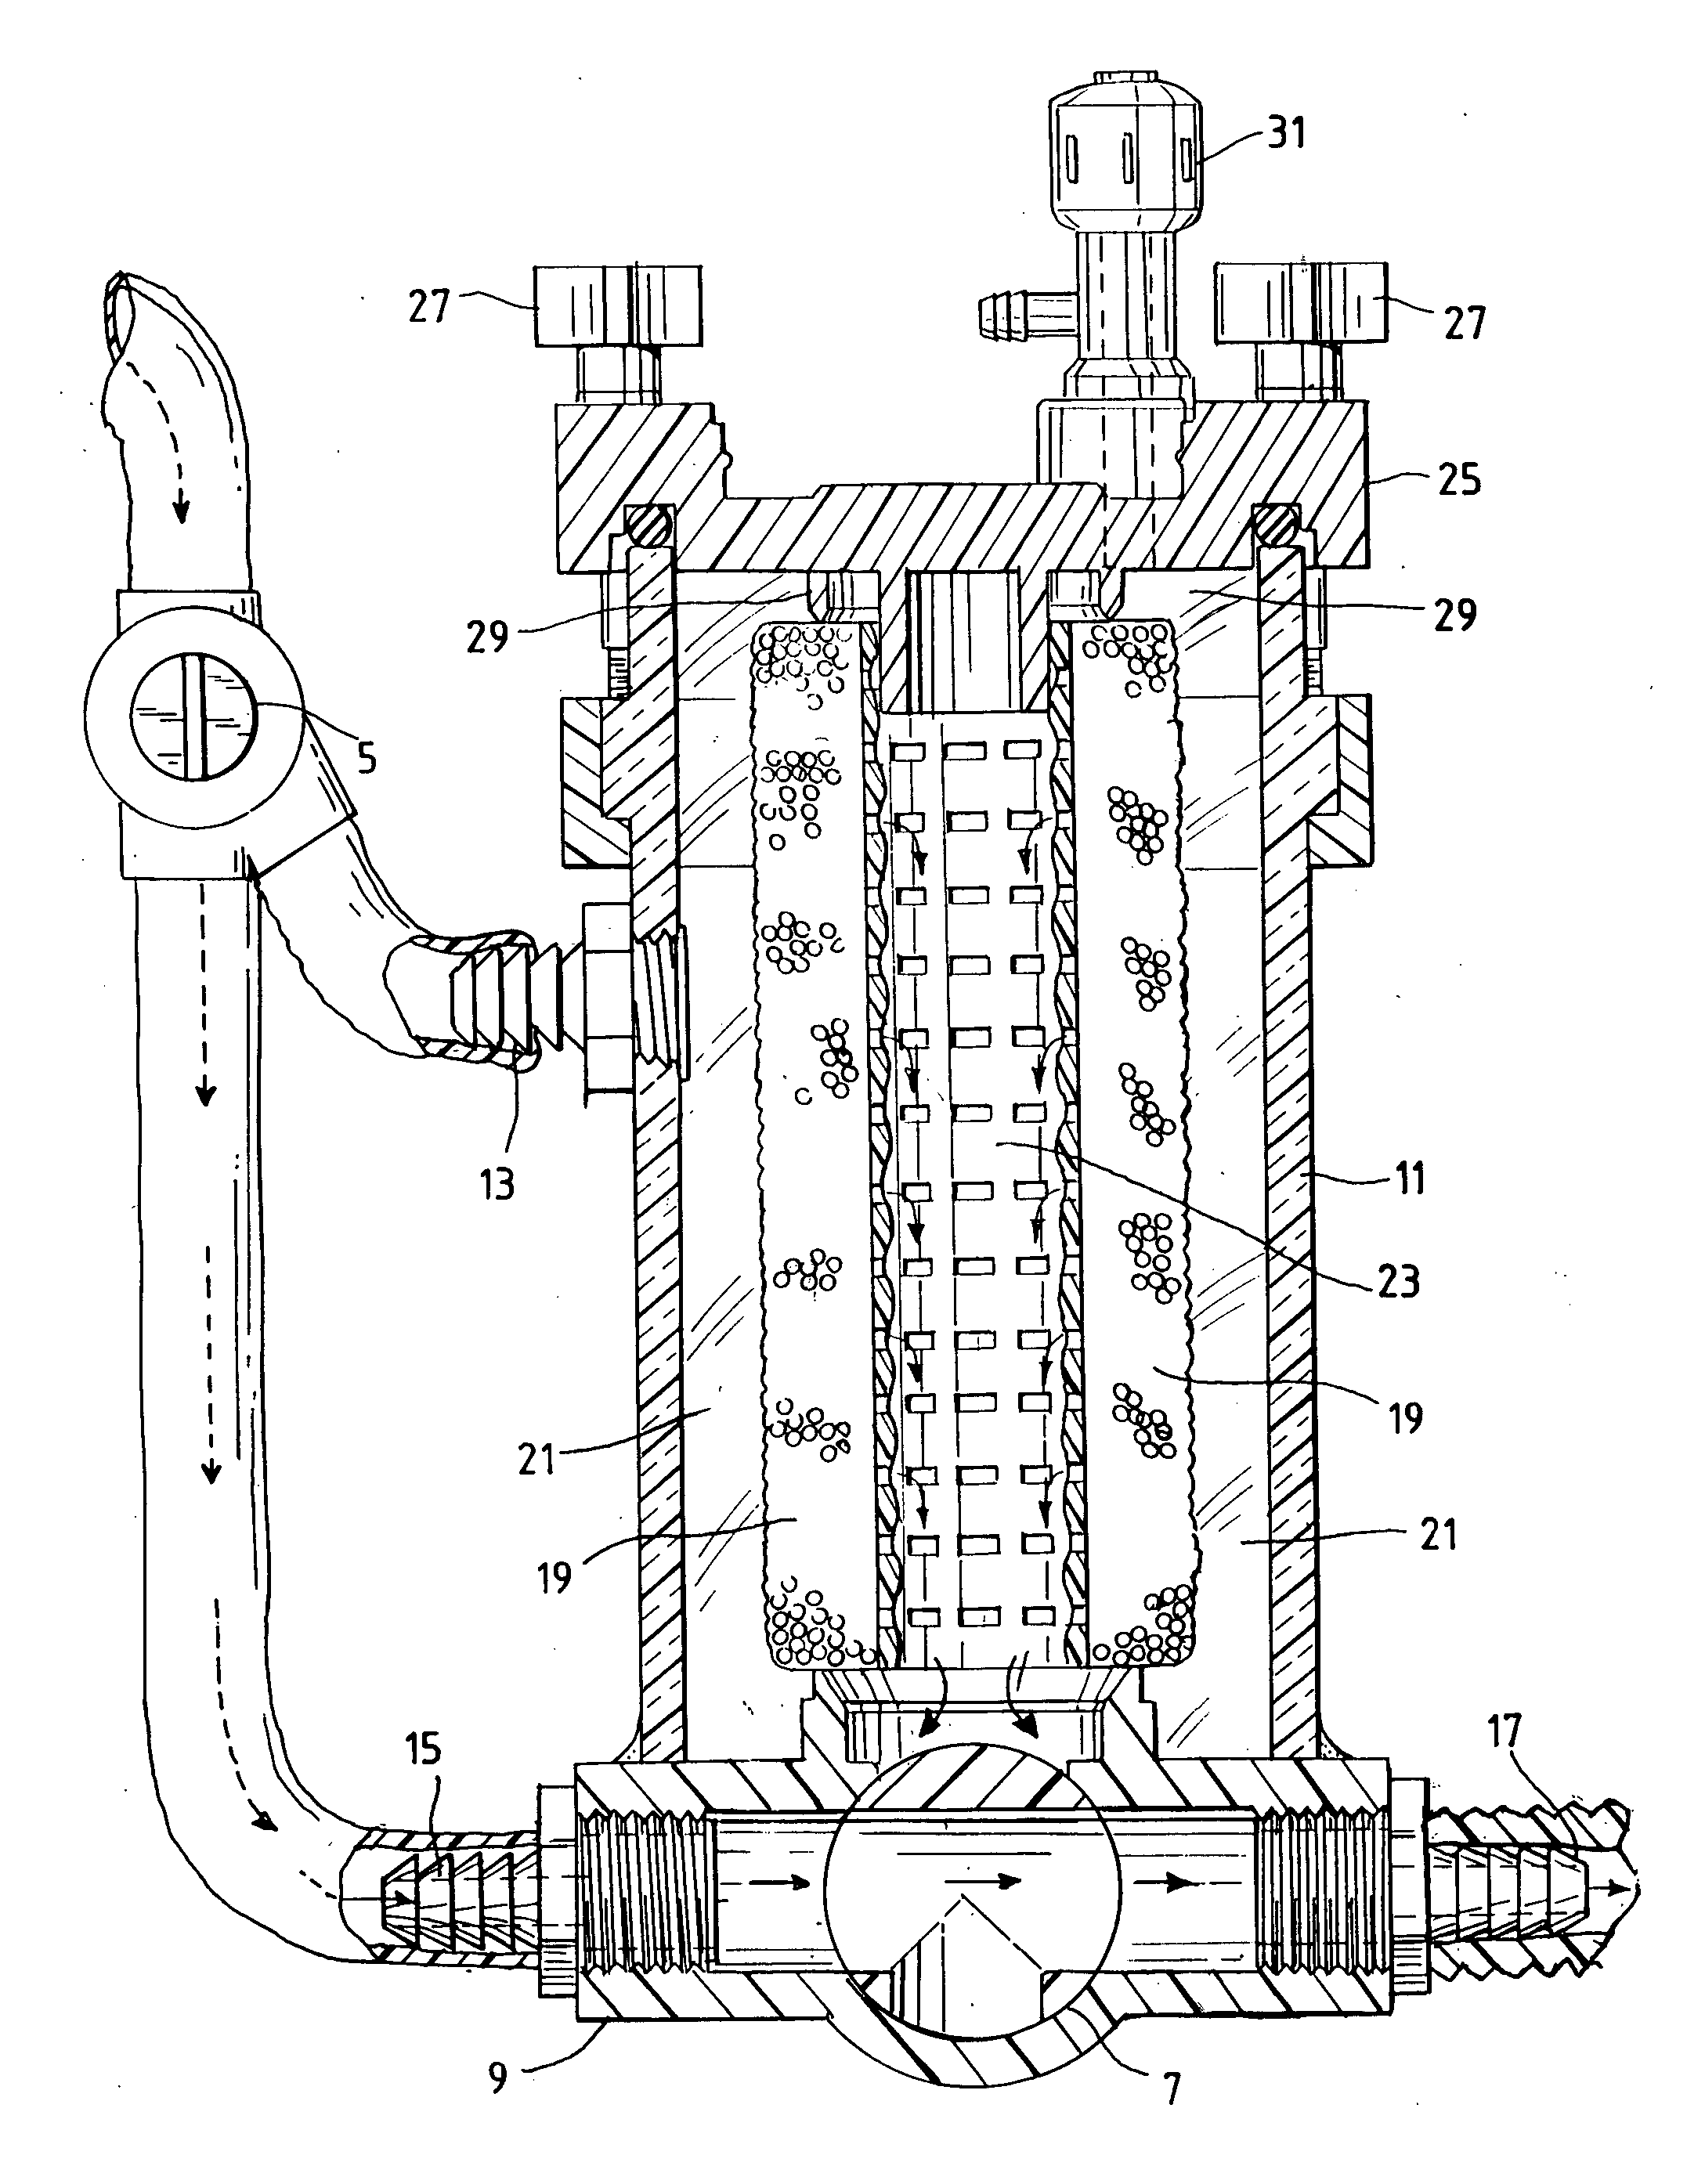 Method and apparatus for removing particulate metals from dental waste water